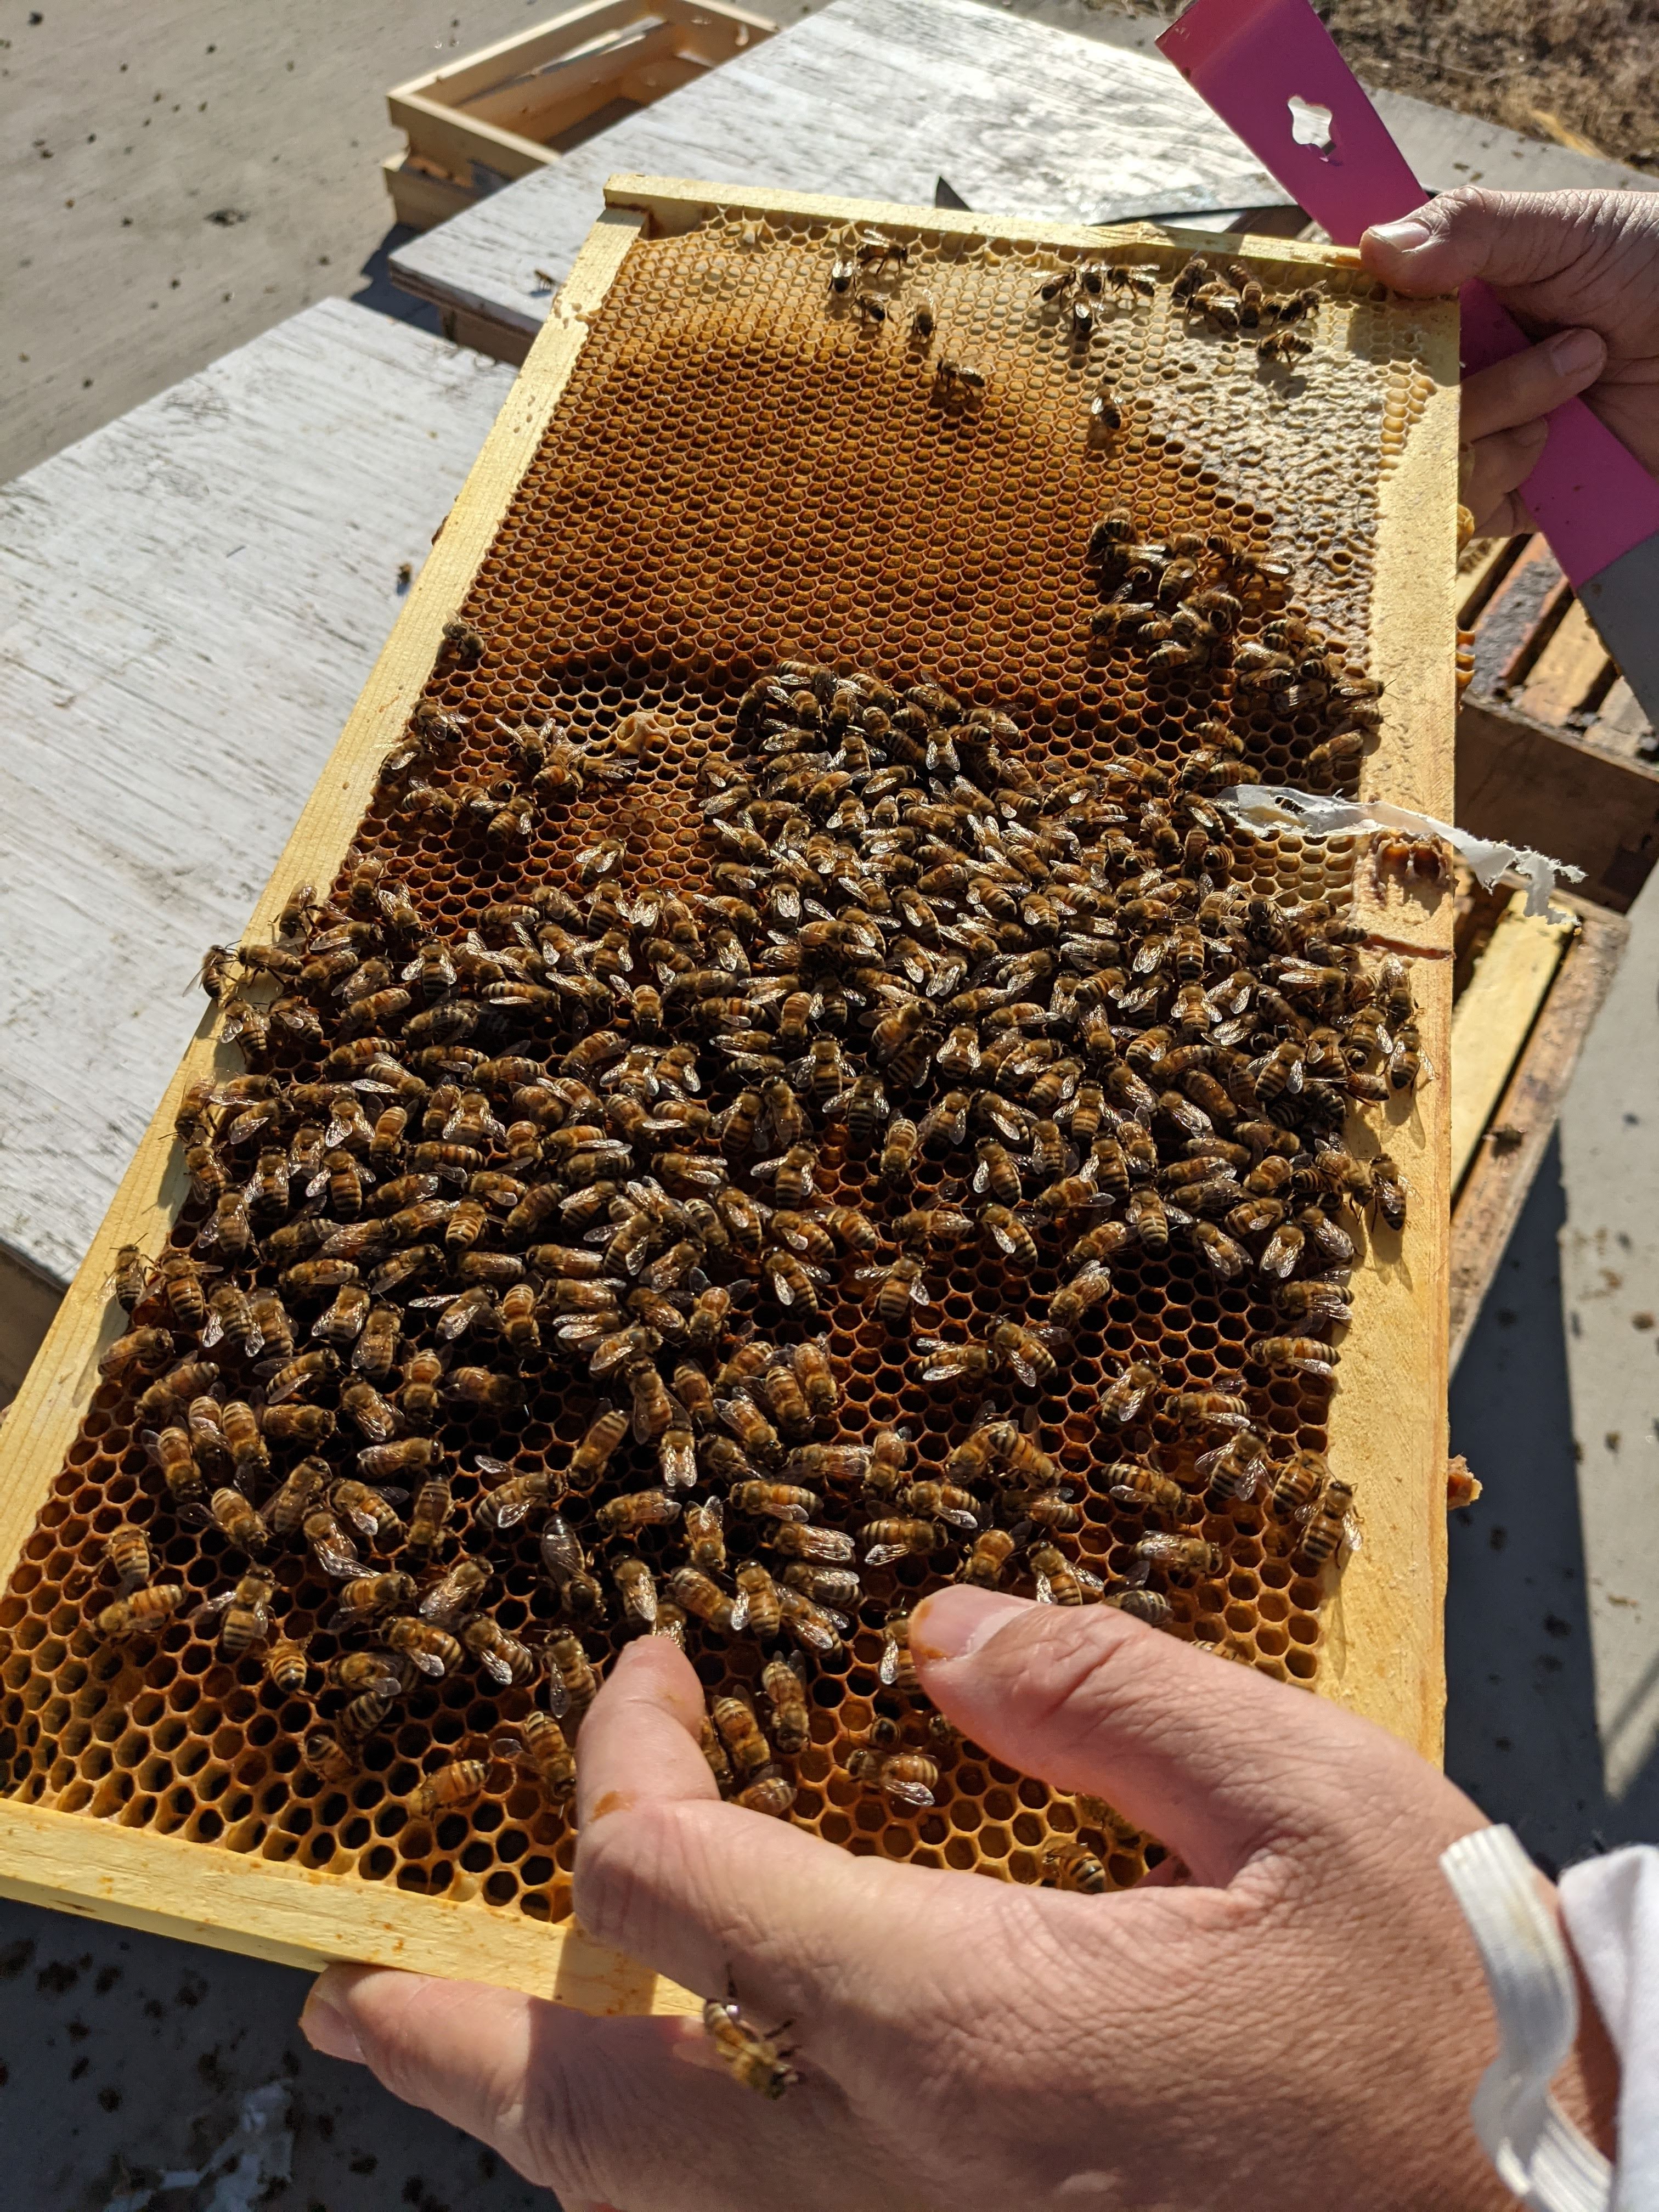 Human hands hold a wooden honeycomb filled with worker bees. 